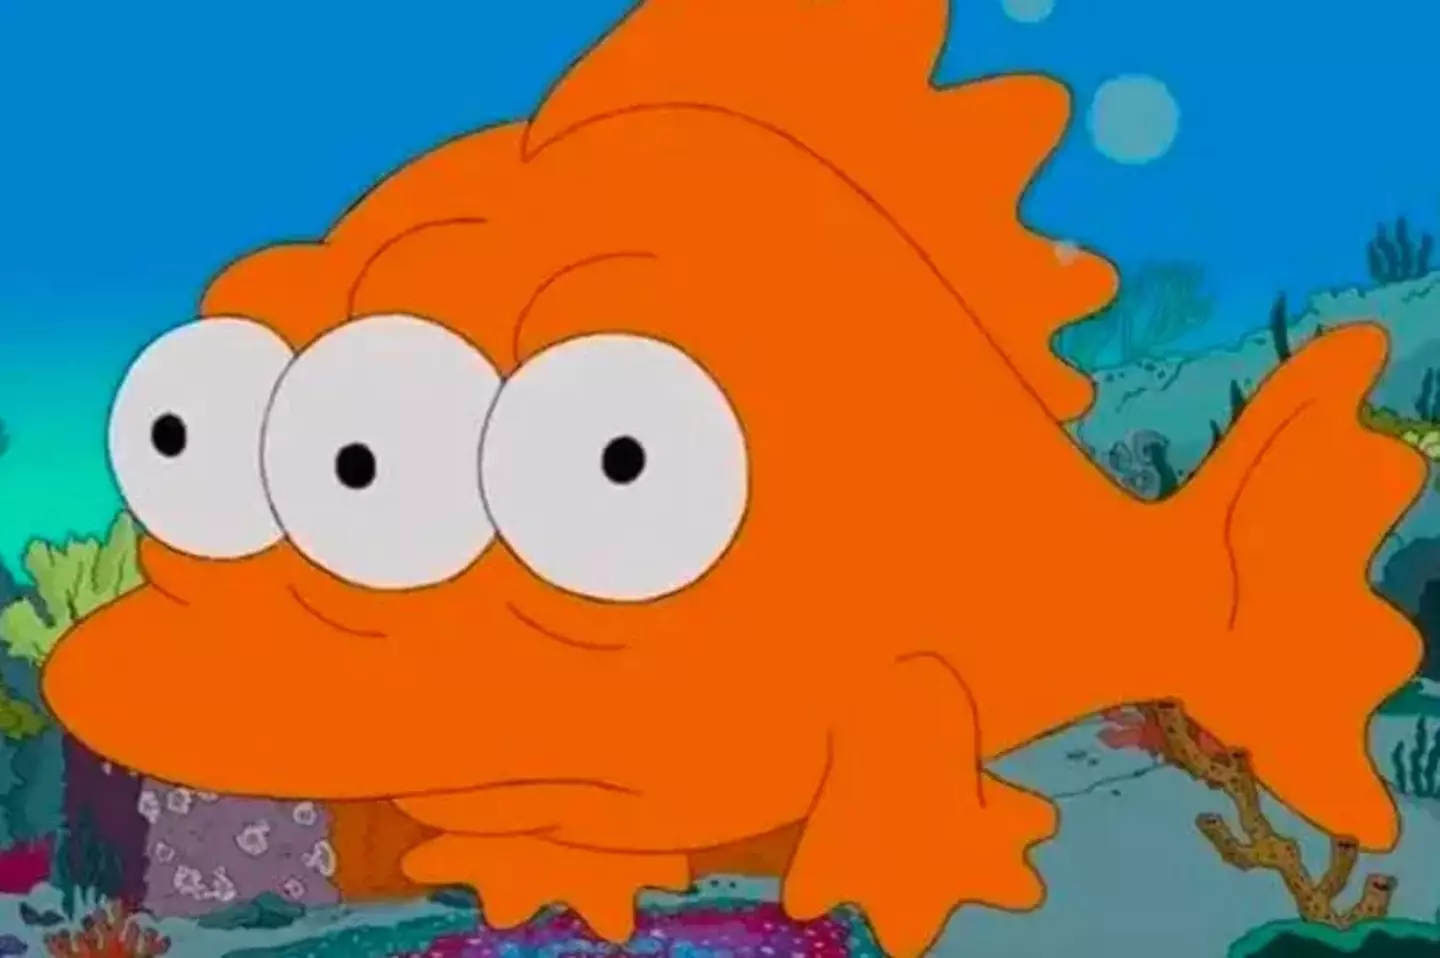 Blinky the three-eyed fish, apparently he's not very tasty. (Fox)